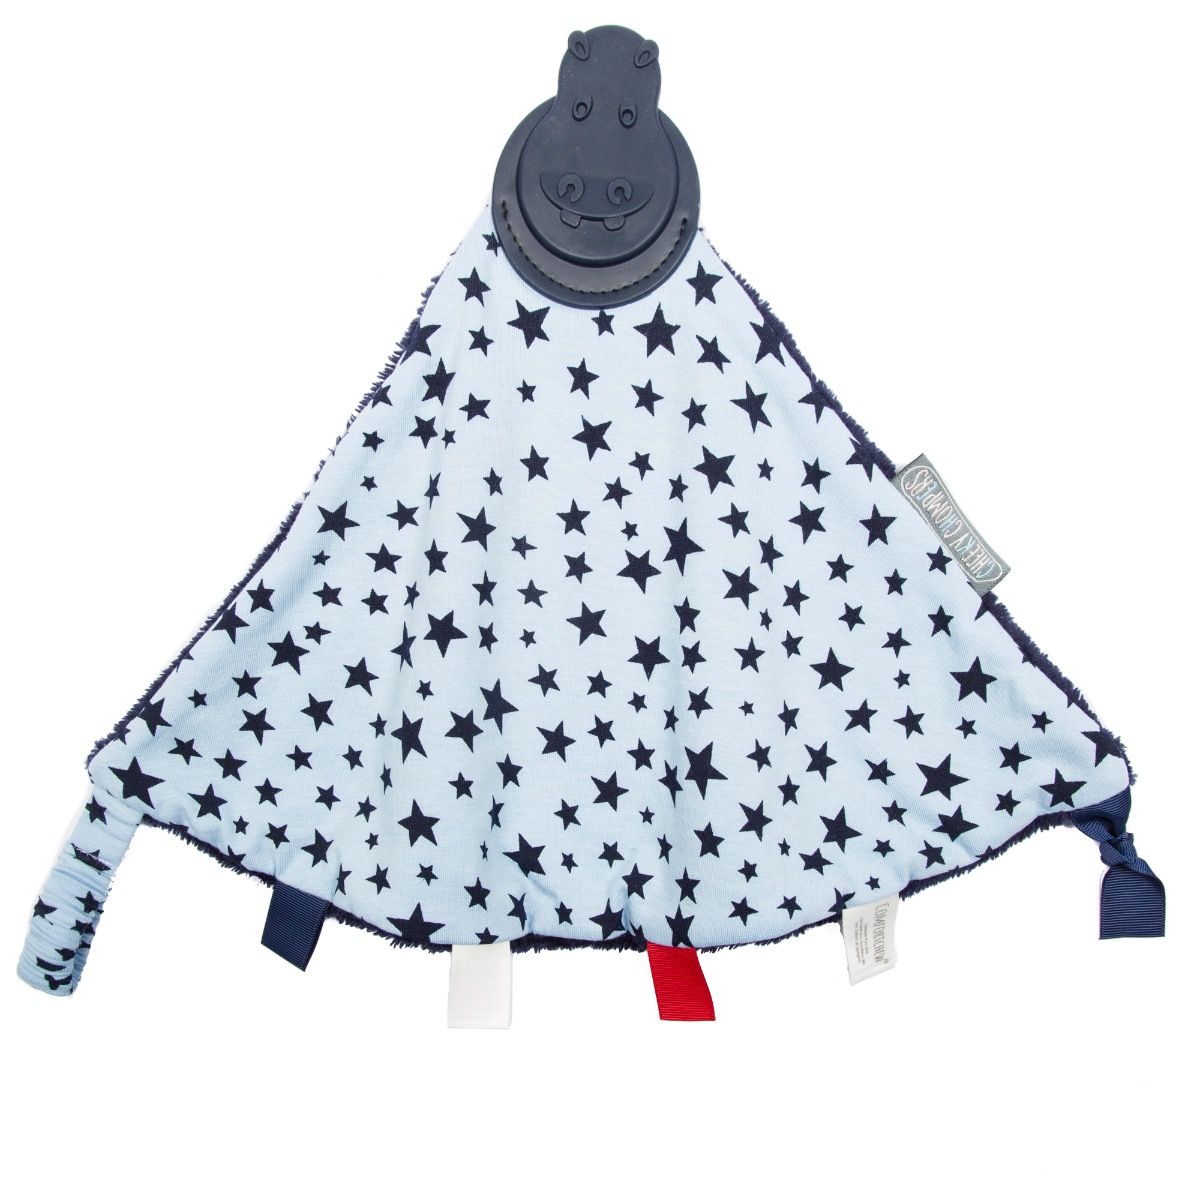 Light blue comforter chew toy with navy starry pattern and ribbon tags